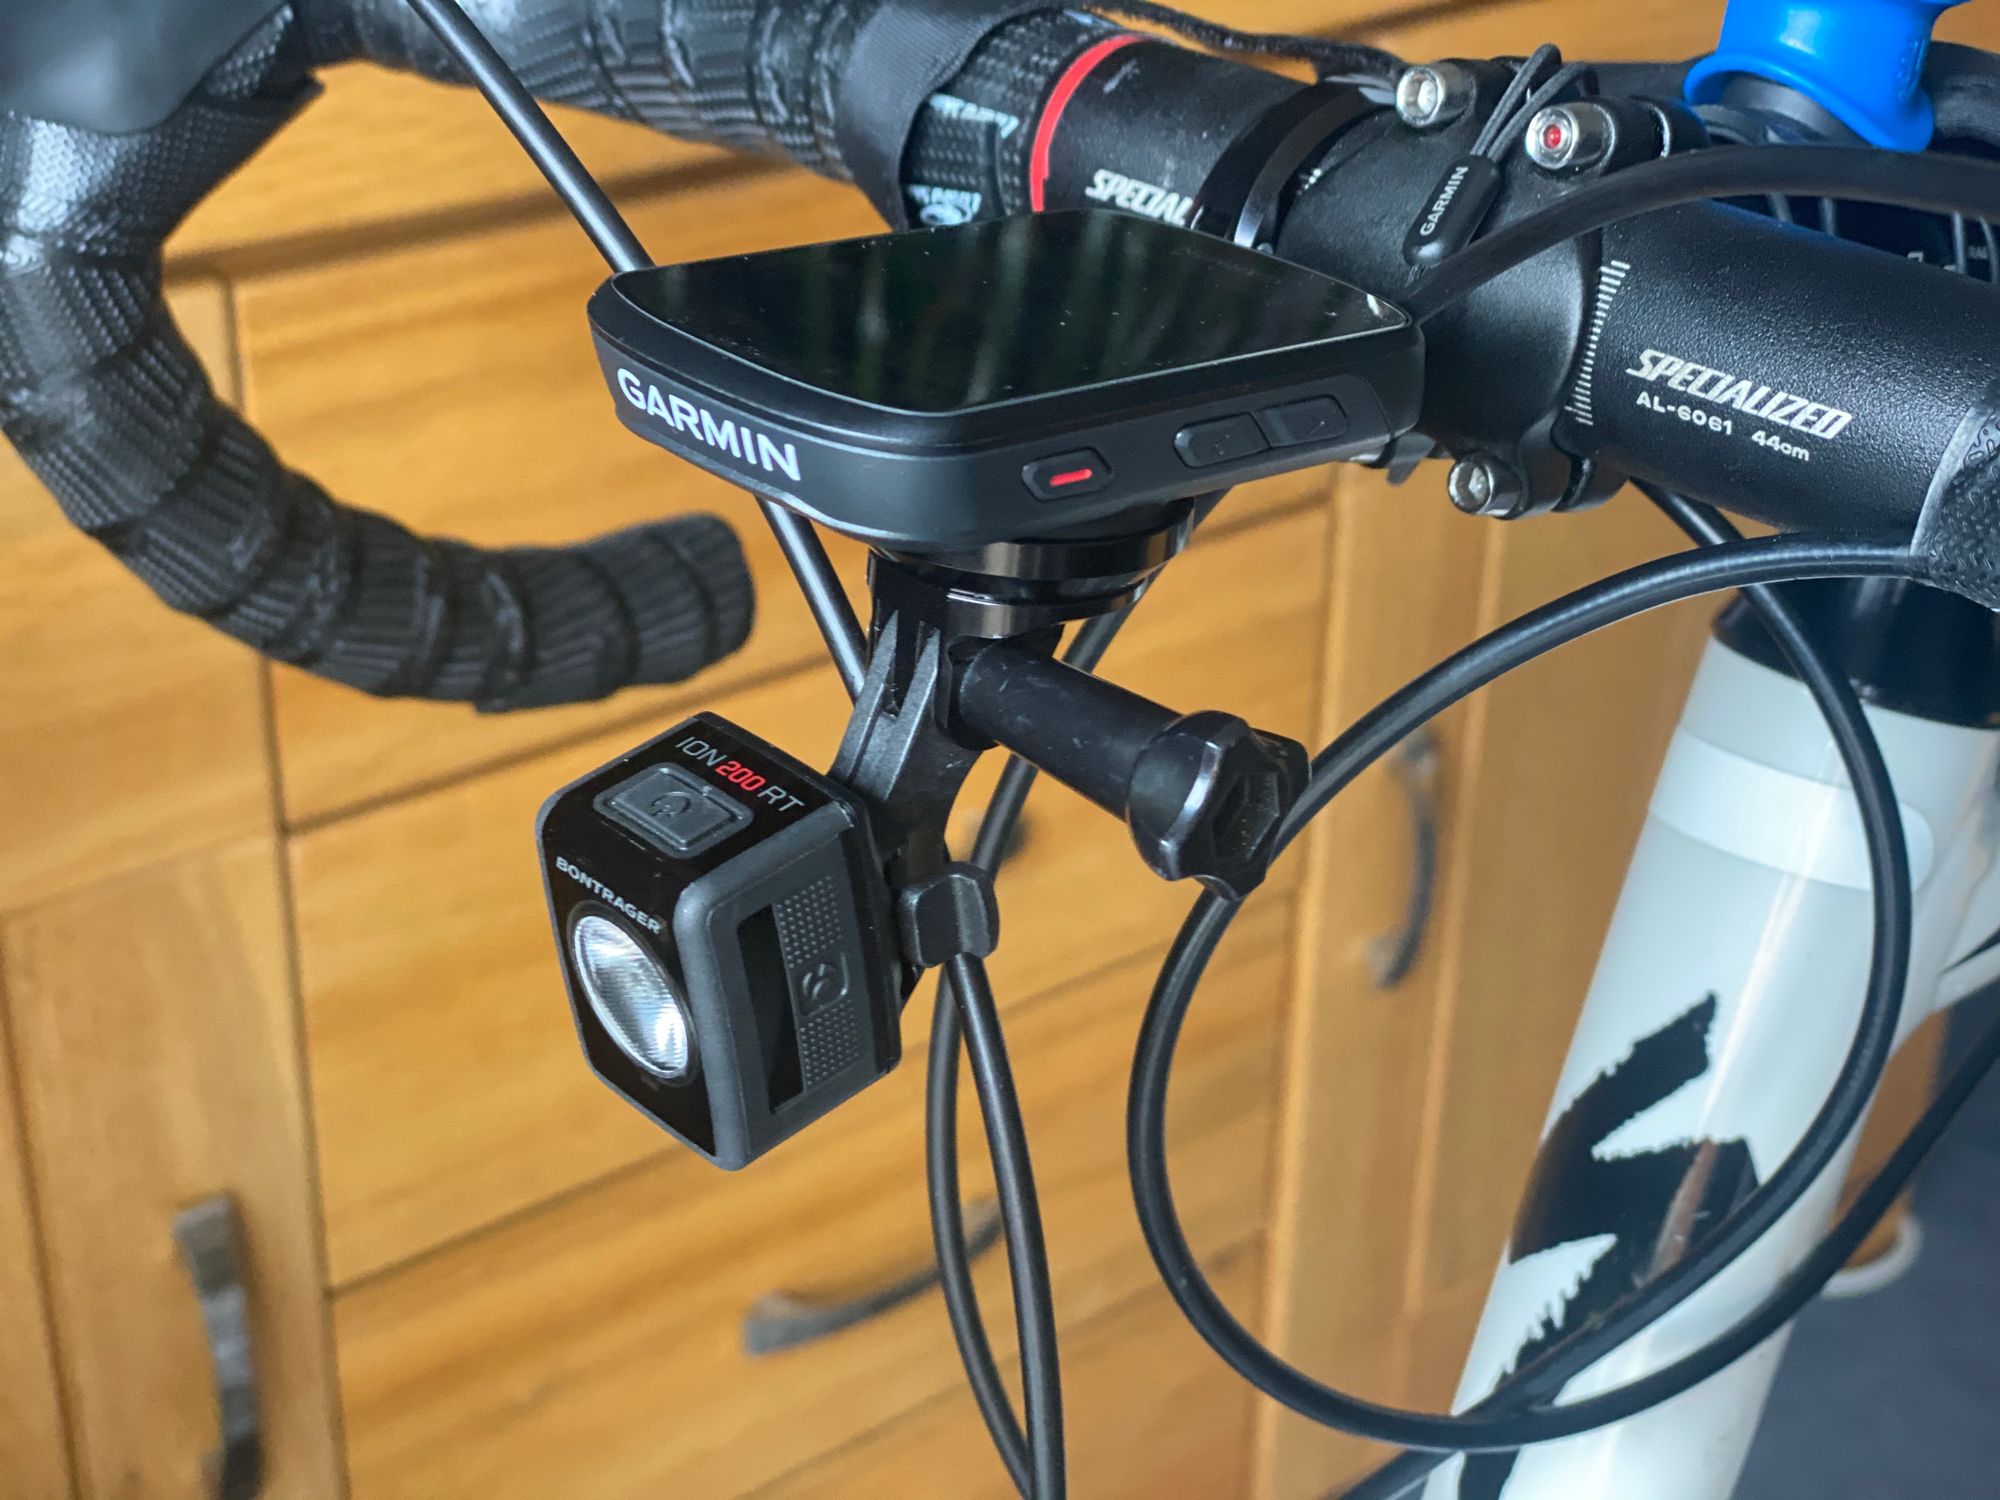 The Best Garmin and Light Mount for your Handlebar